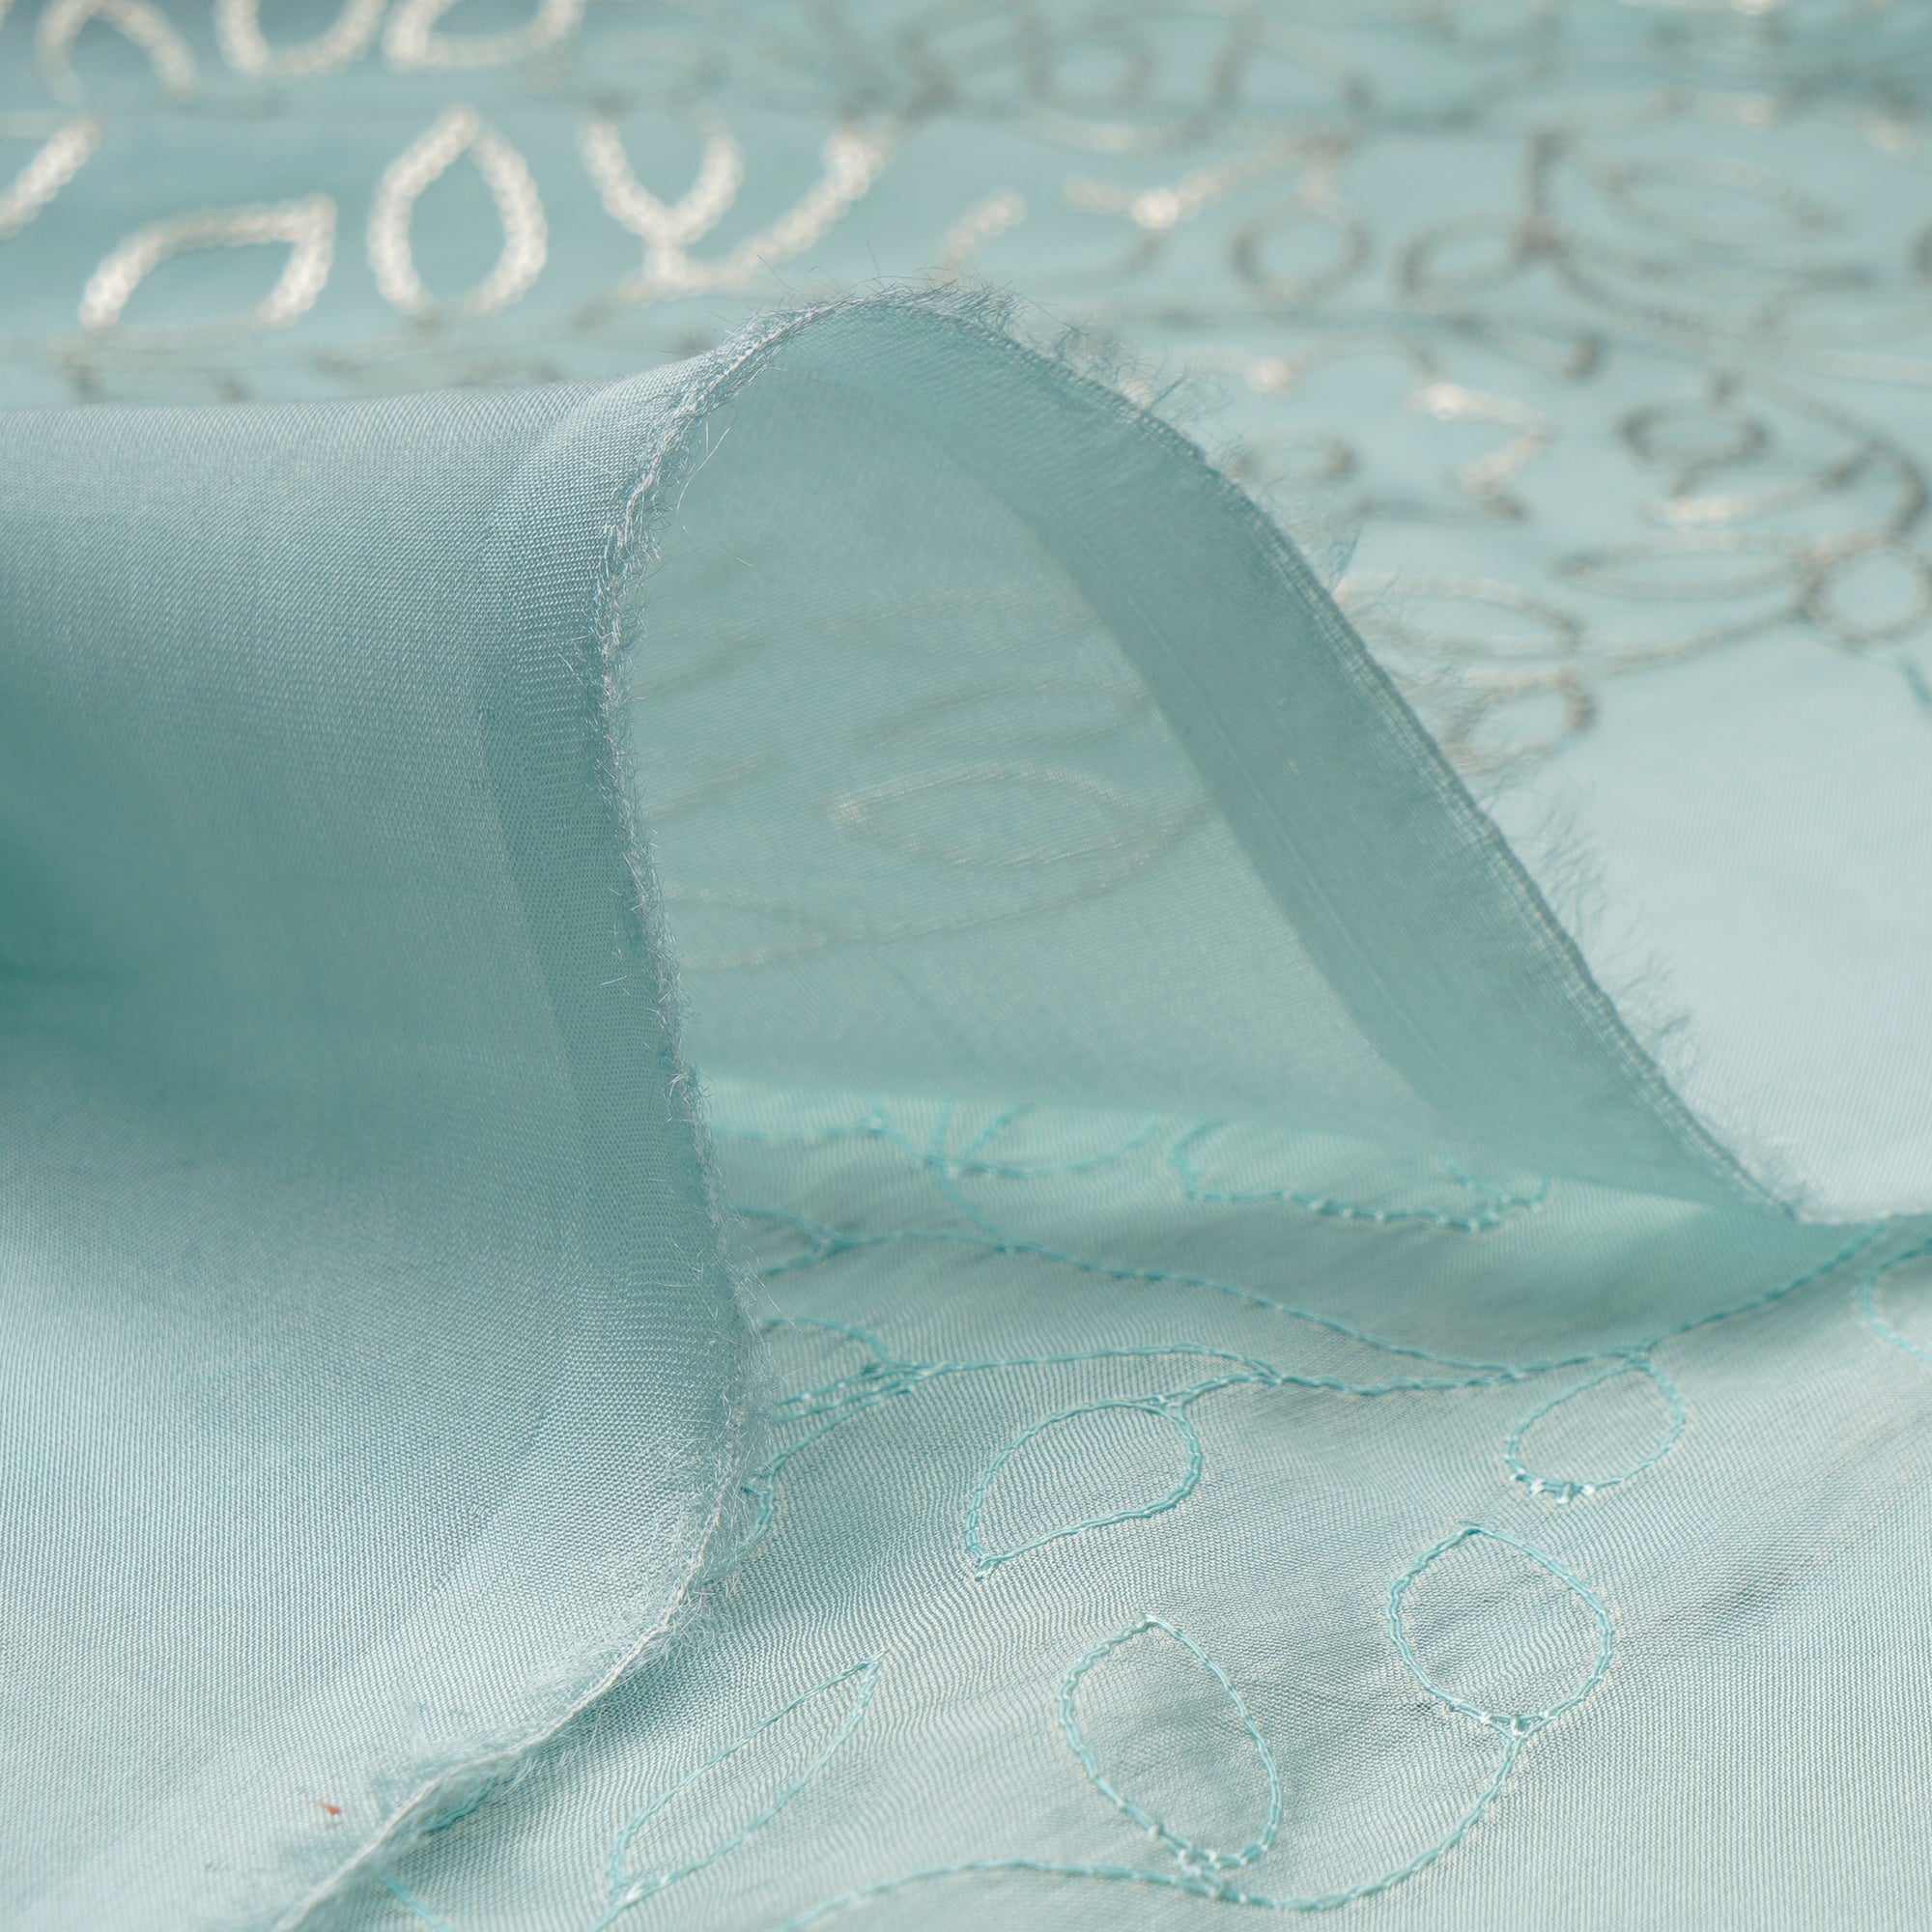 Brook Green All Over Sequins Embroidered Viscose Organza Fabric